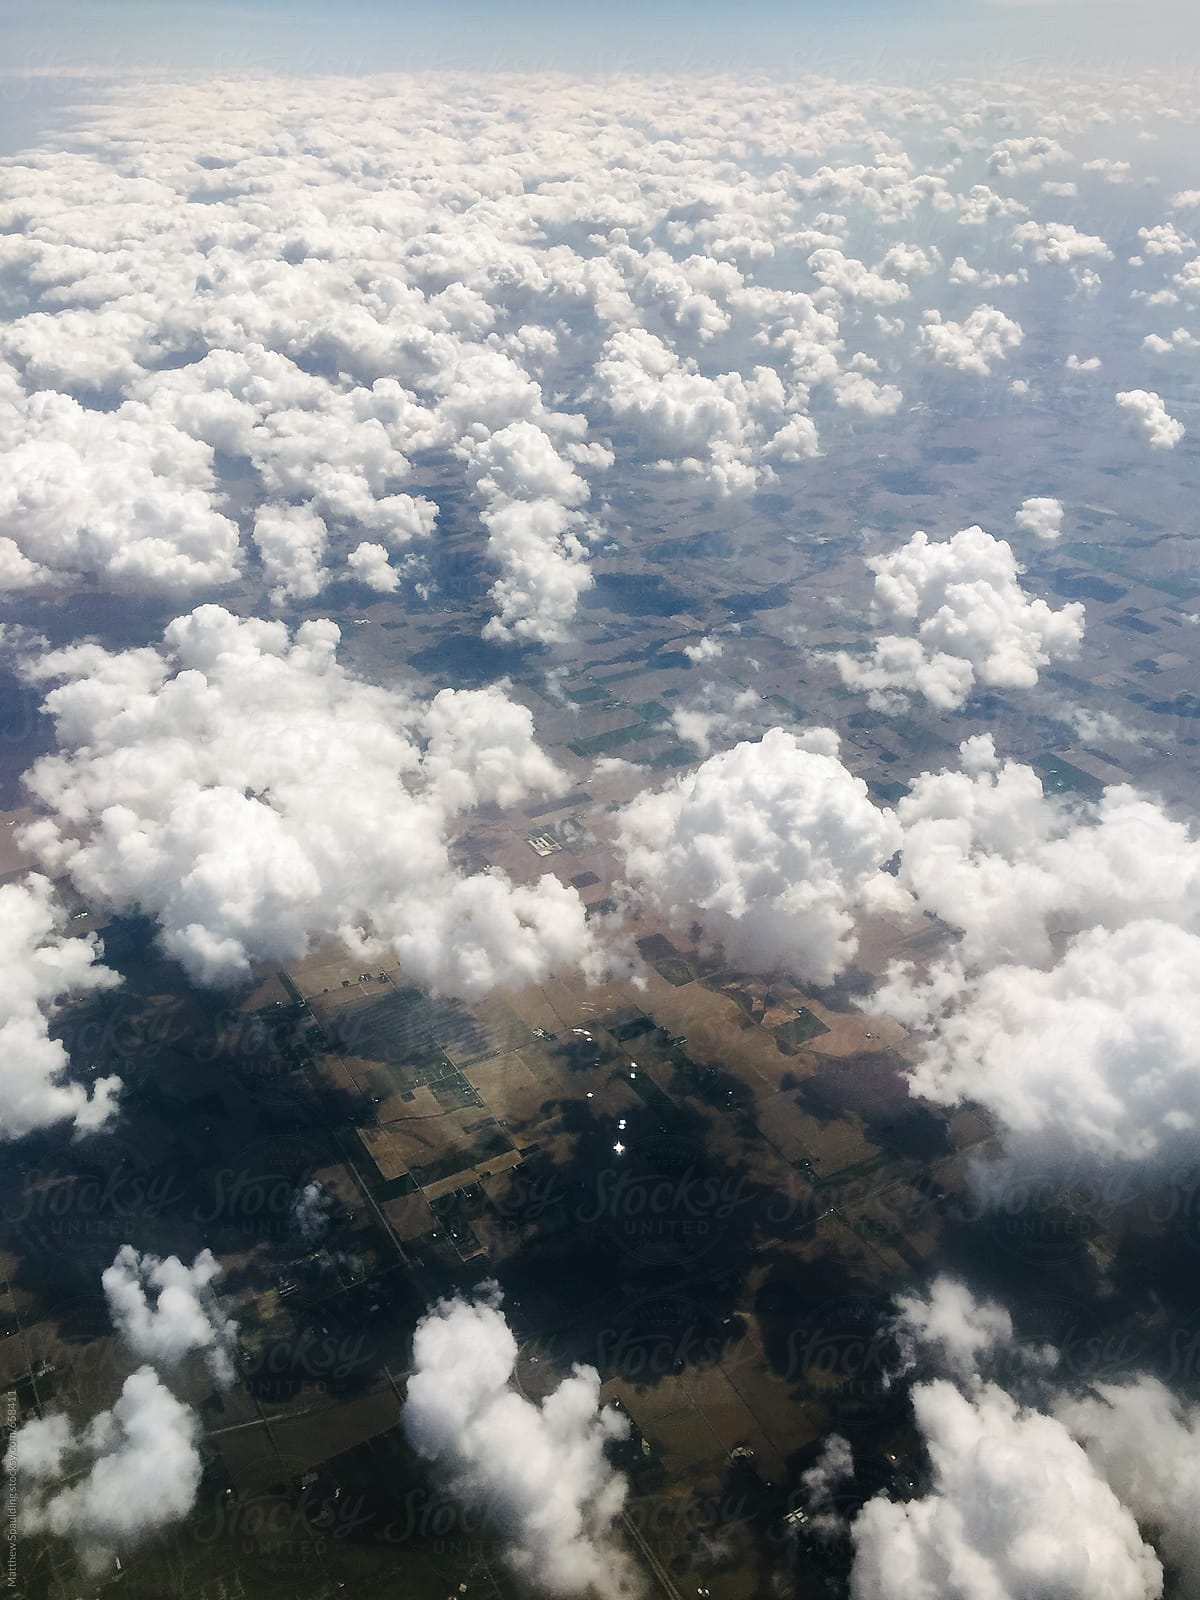 Cloud formations viewed above from airplane window